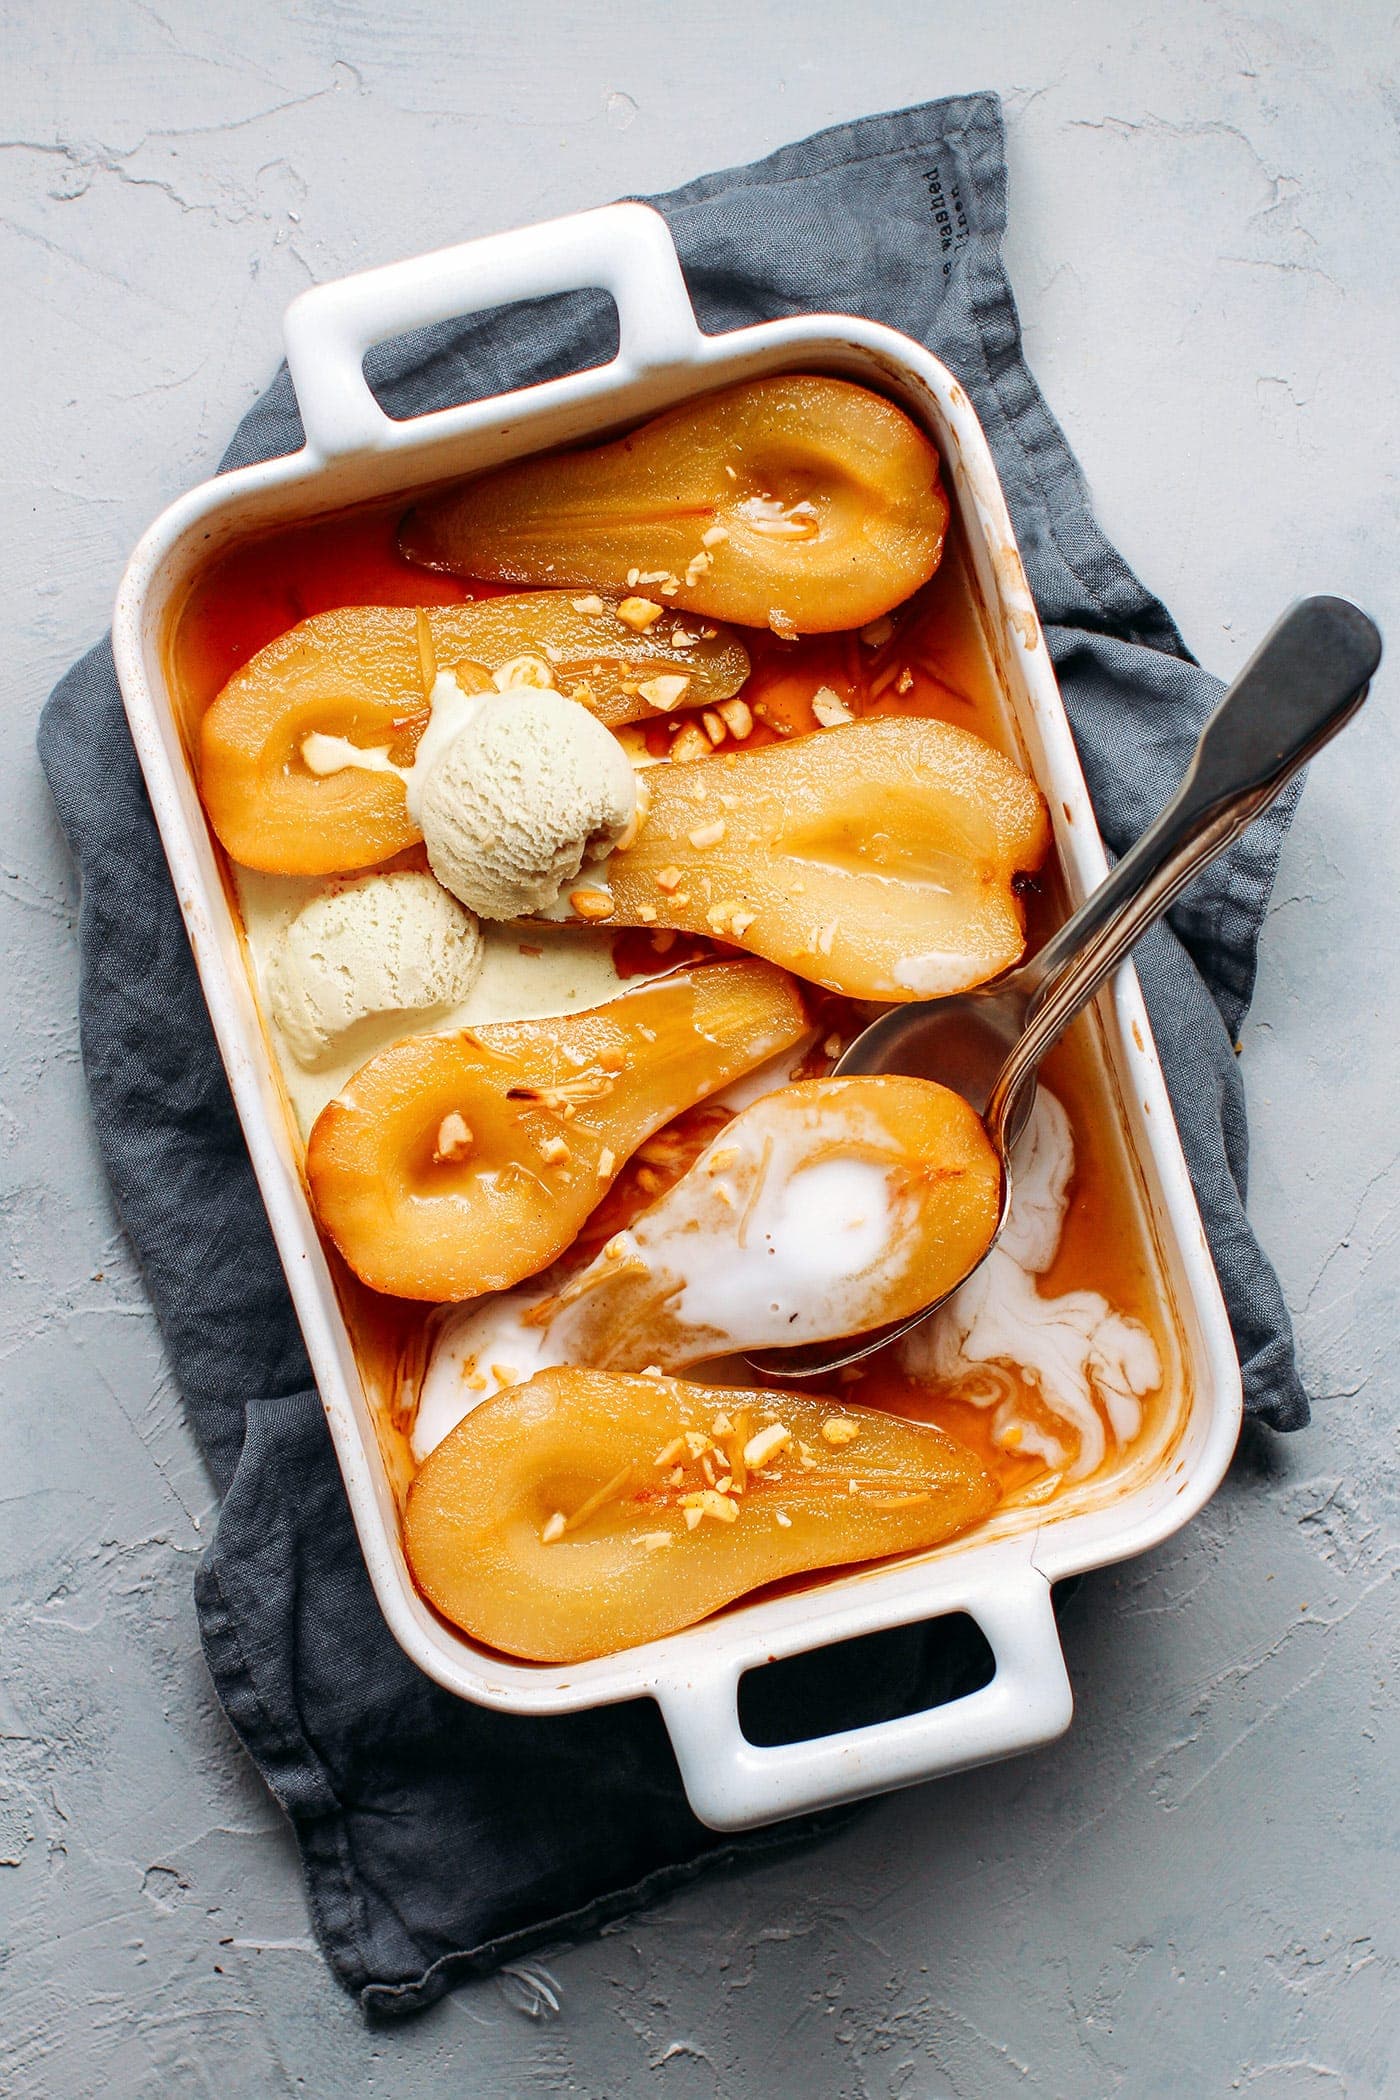 Roasted Pears in Ginger Syrup